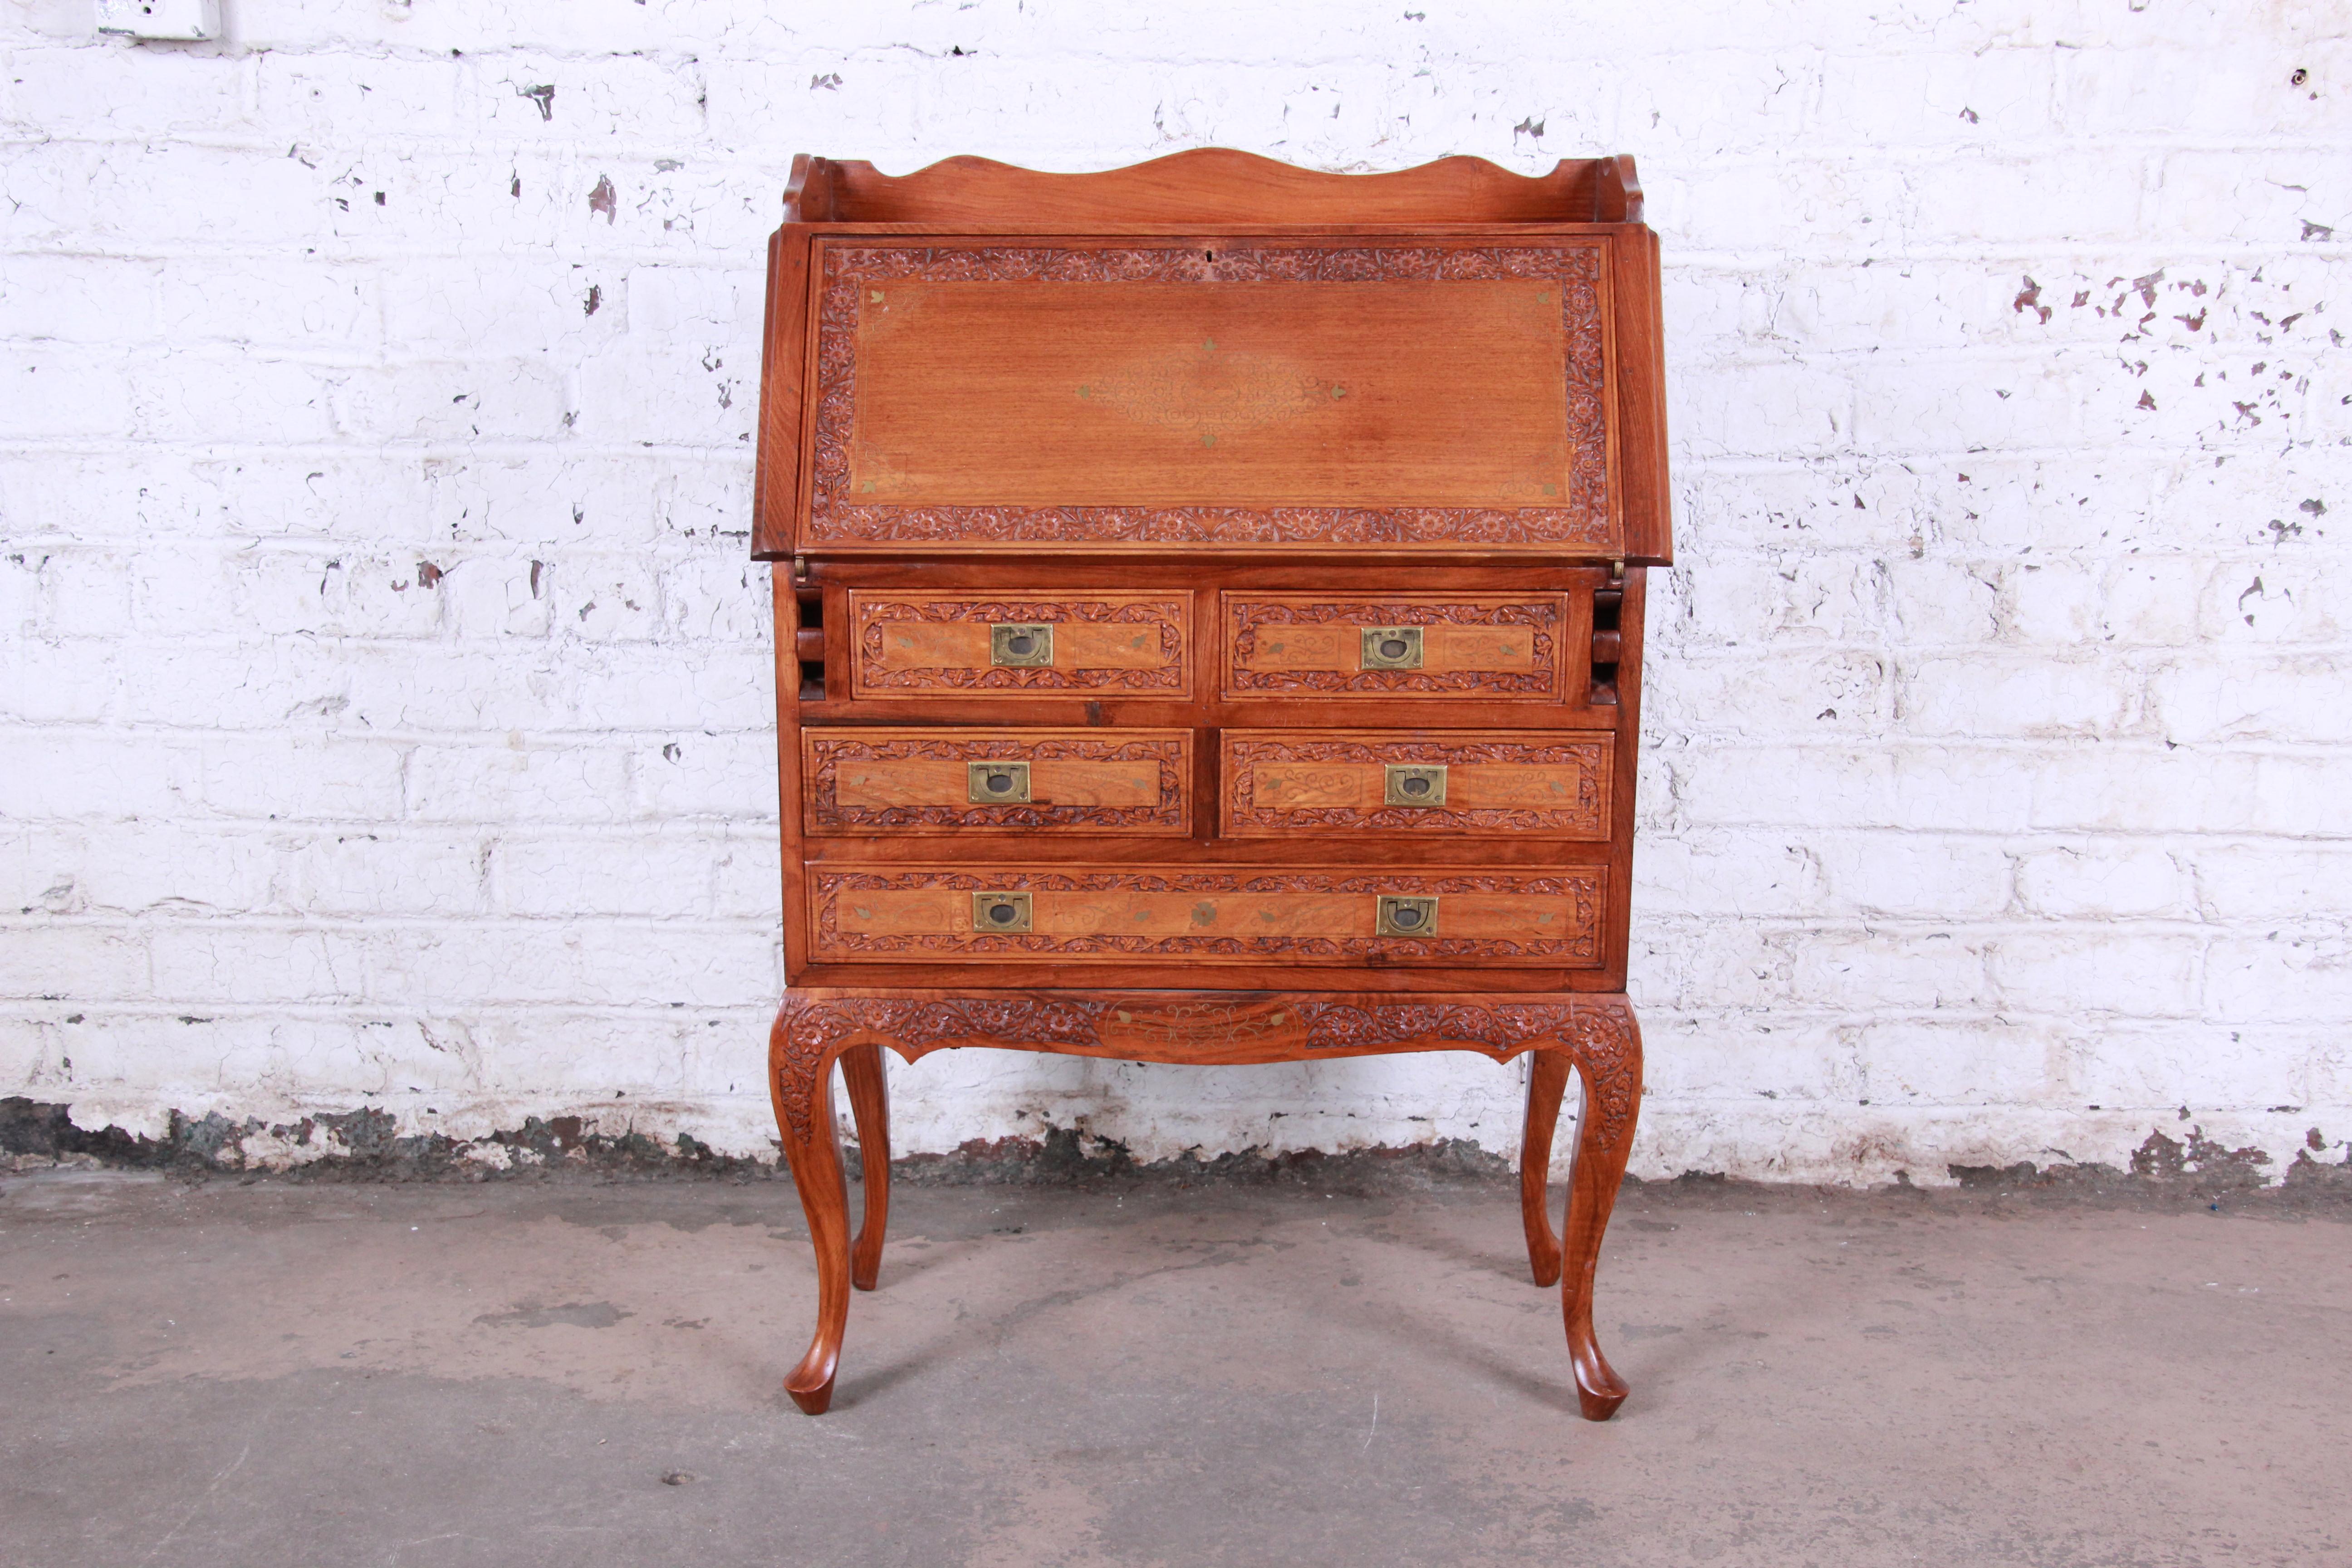 A gorgeous ornate carved elm wood Chinoiserie secretary desk. The desk features beautiful carved wood and inlaid brass details. The campaign style hardware is original, and it has nice Queen Anne style legs. The desk is petite but still offers good